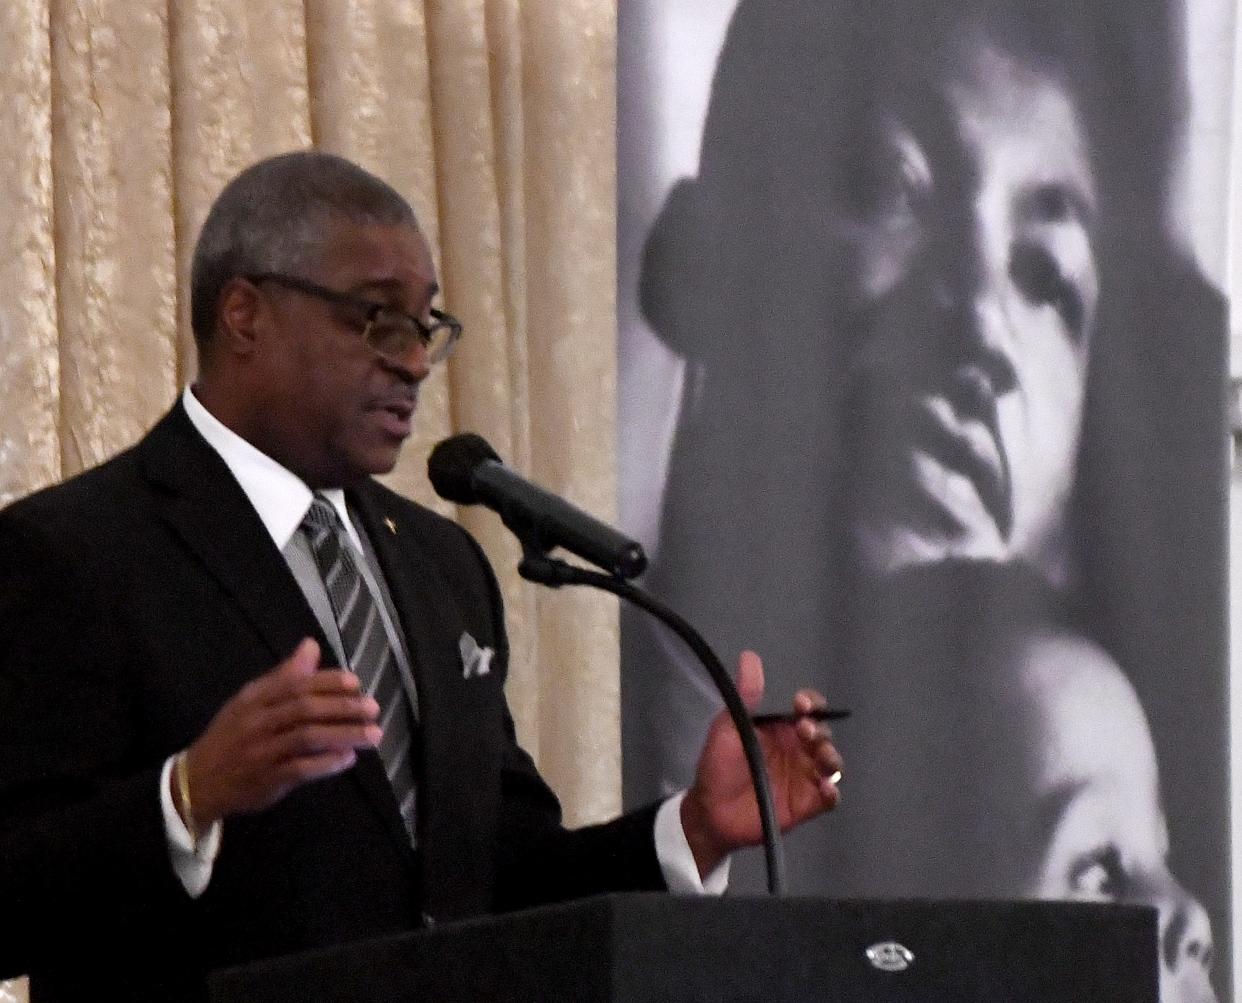 The Rev. Walter J. Arrington speaks to the crowd gathered for Thursday's 31st annual MLK Jr. Mayors' Breakfast at the DoubleTree by Hilton in downtown Canton.